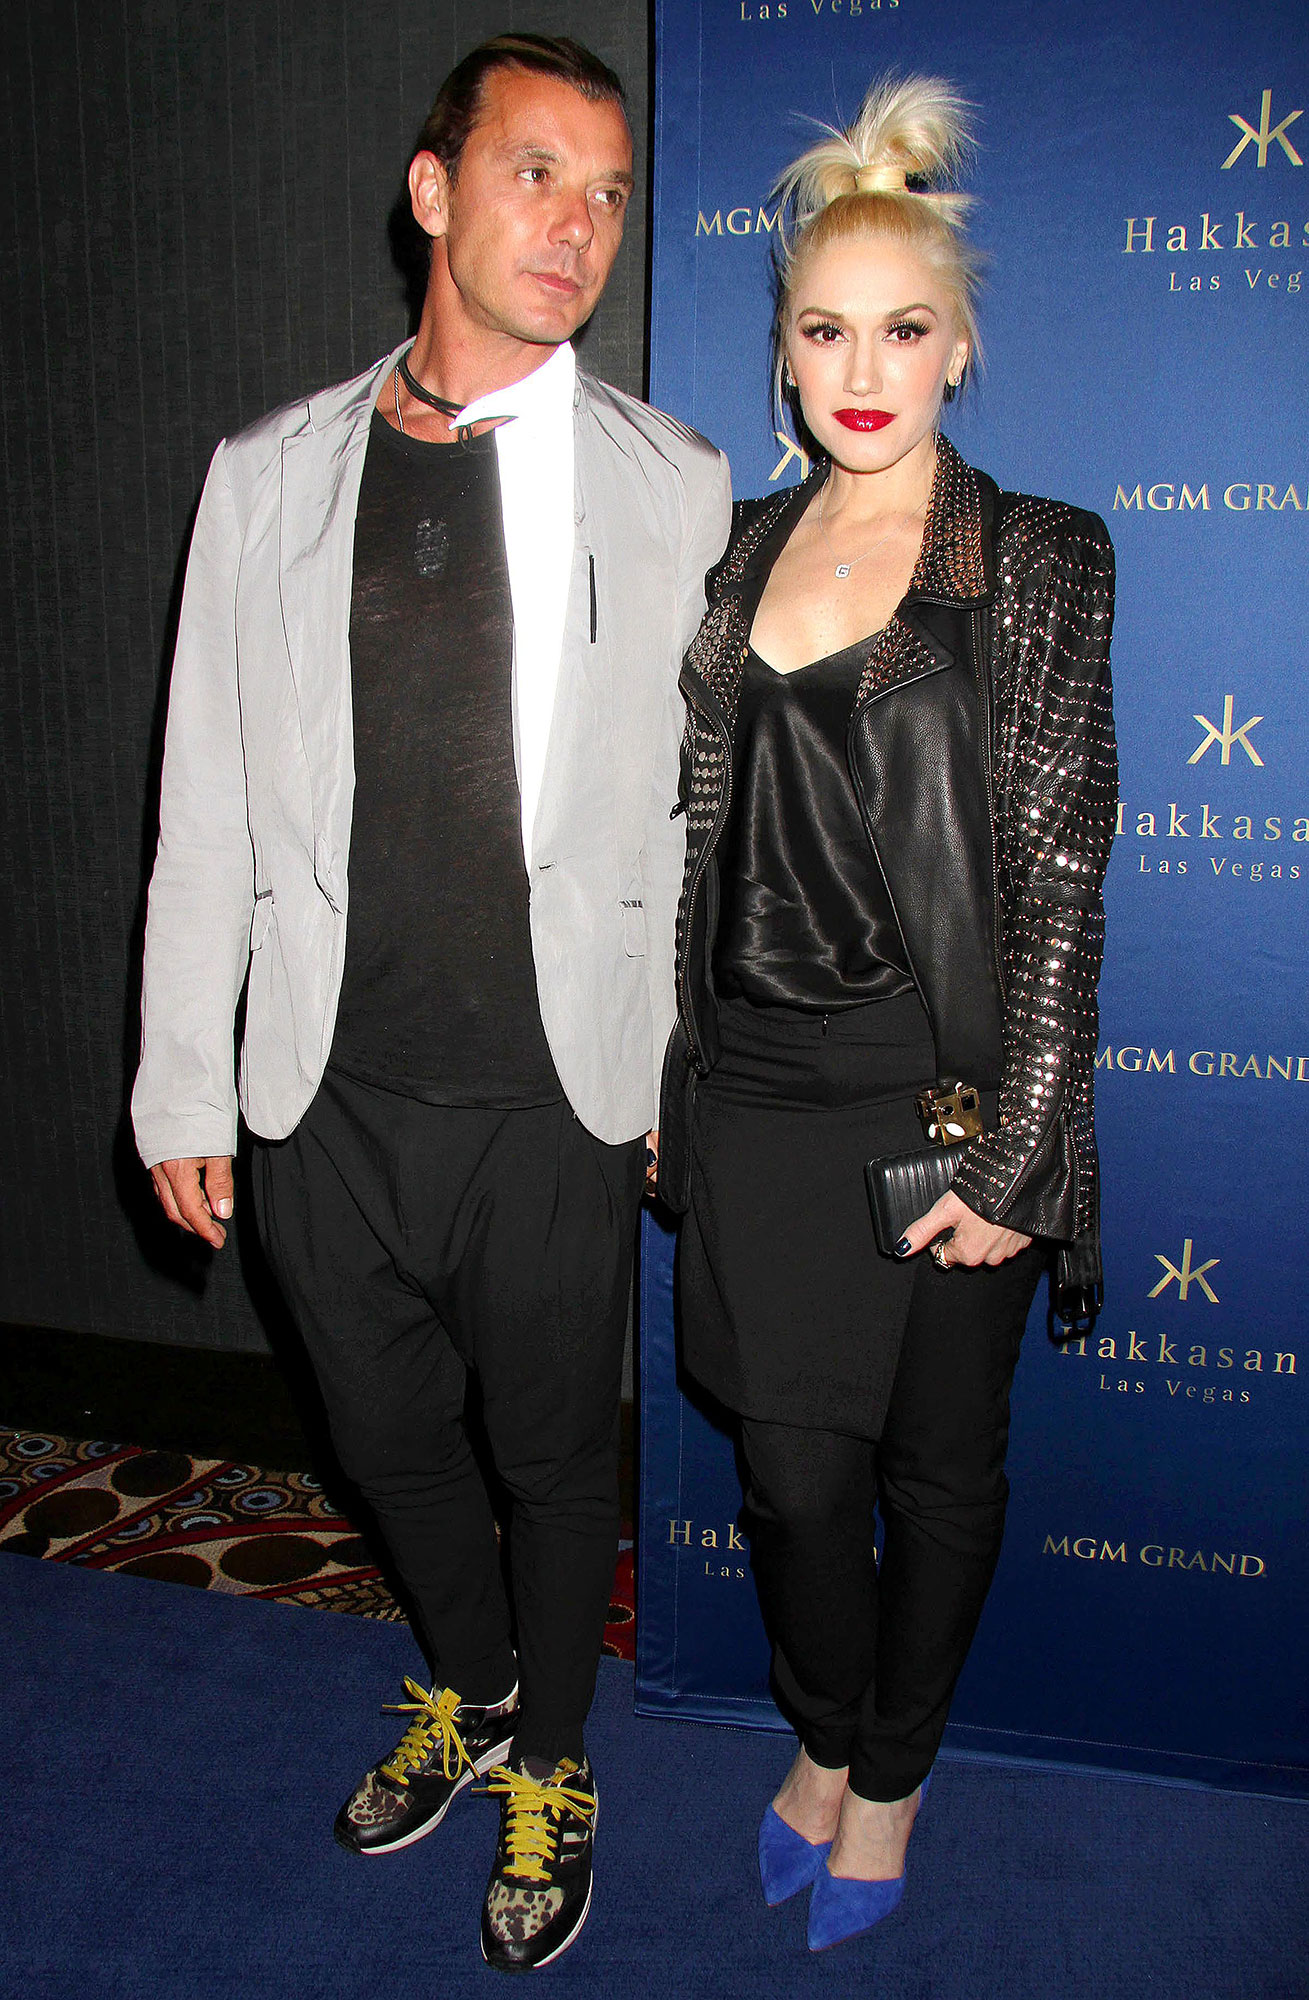 Gavin Rossdale Cheated on Gwen Stefani With Nanny for Years Details